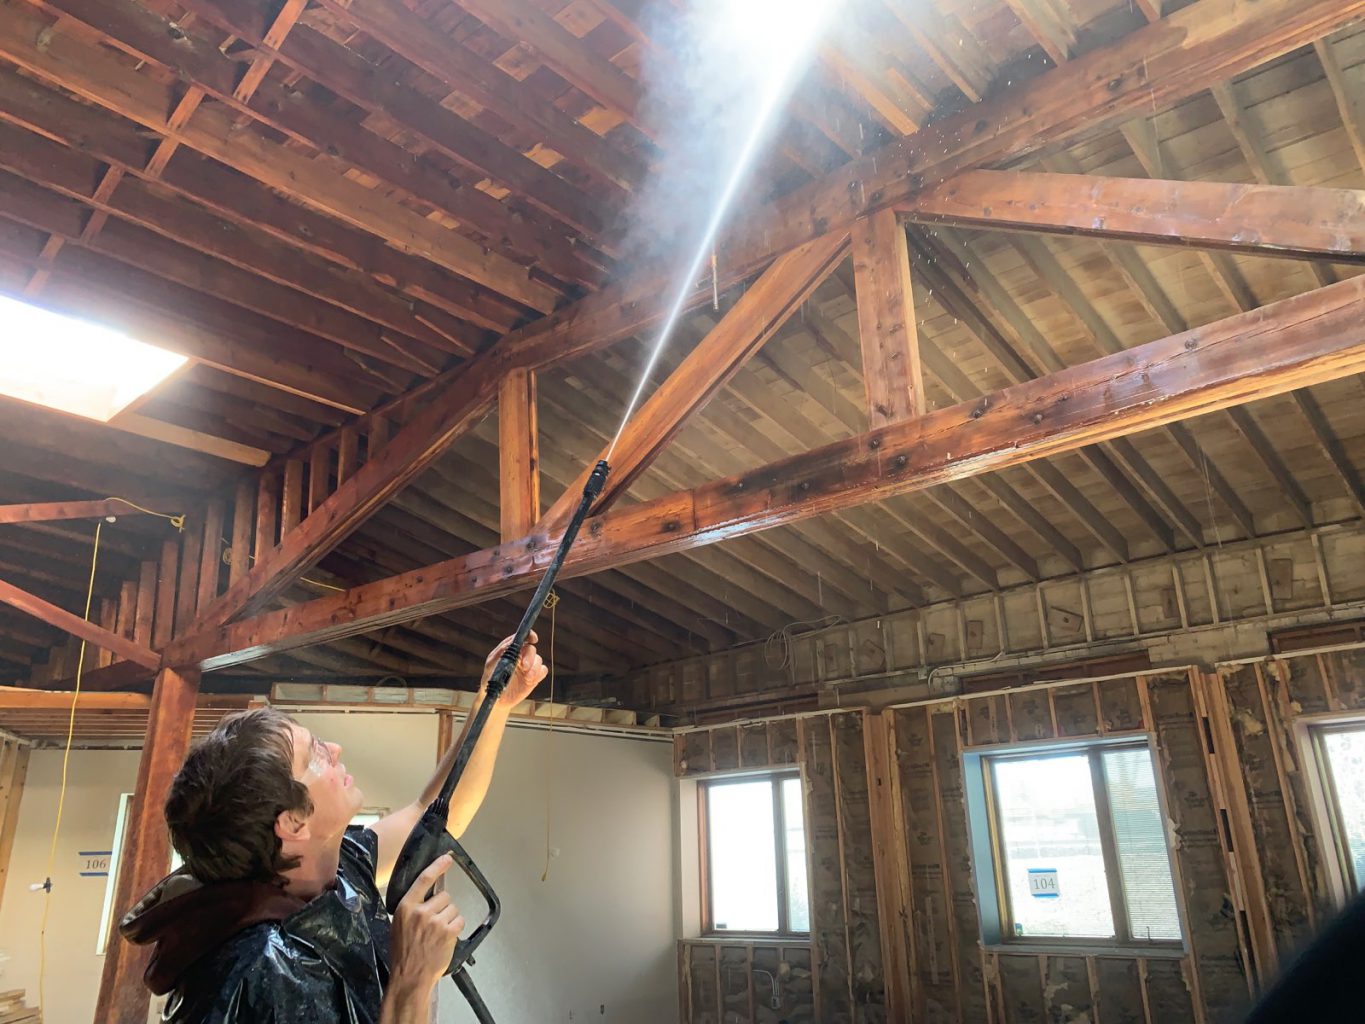 Worker blasts ceiling with water to remove old paint from trusses and rafters